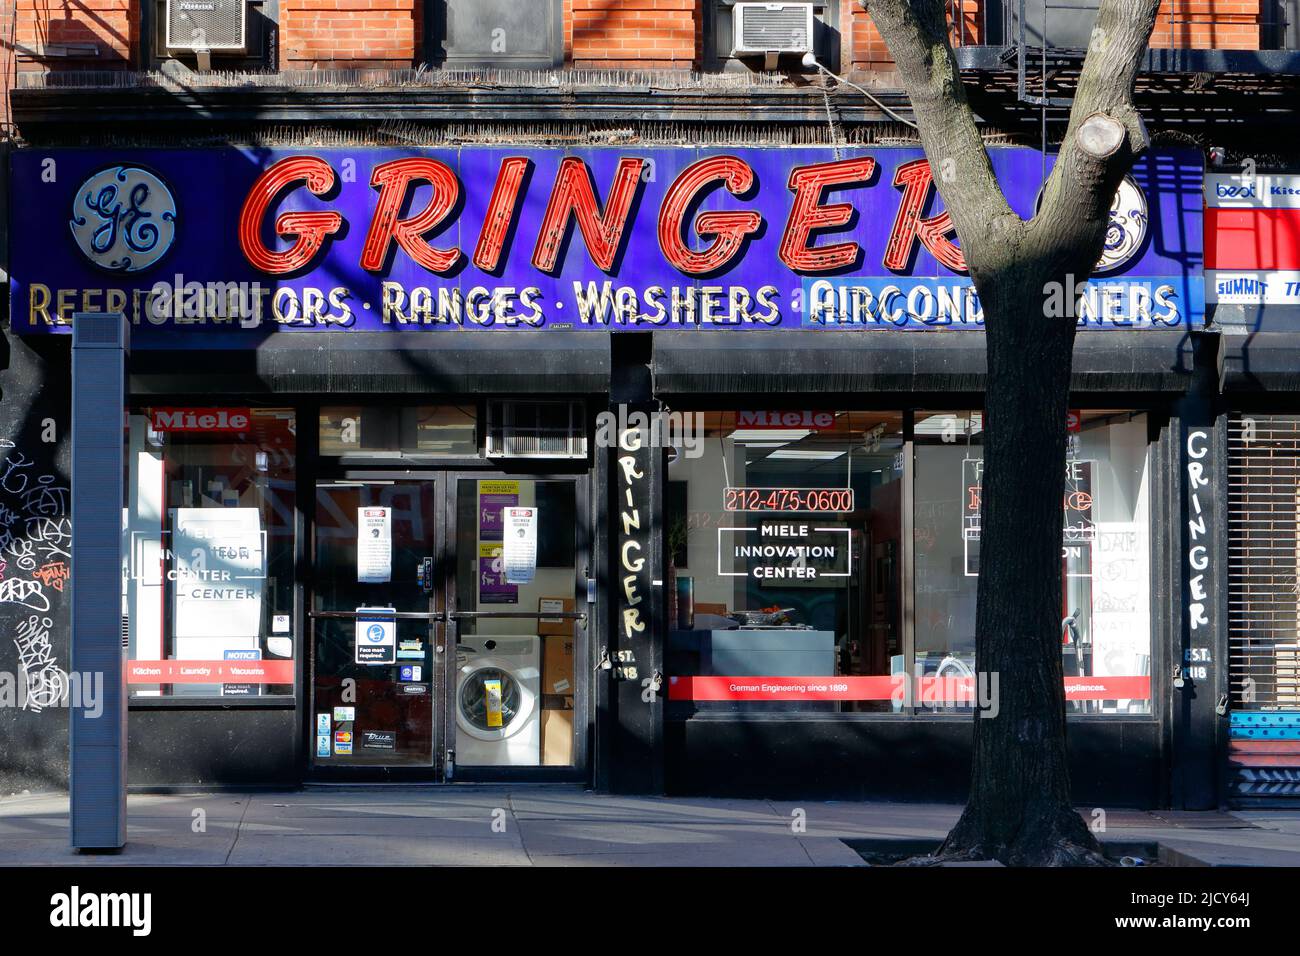 Gringer & Sons, 29 1st Ave., New York, NYC storefront photo of an appliance store in the East Village neighborhood in Manhattan. Stock Photo